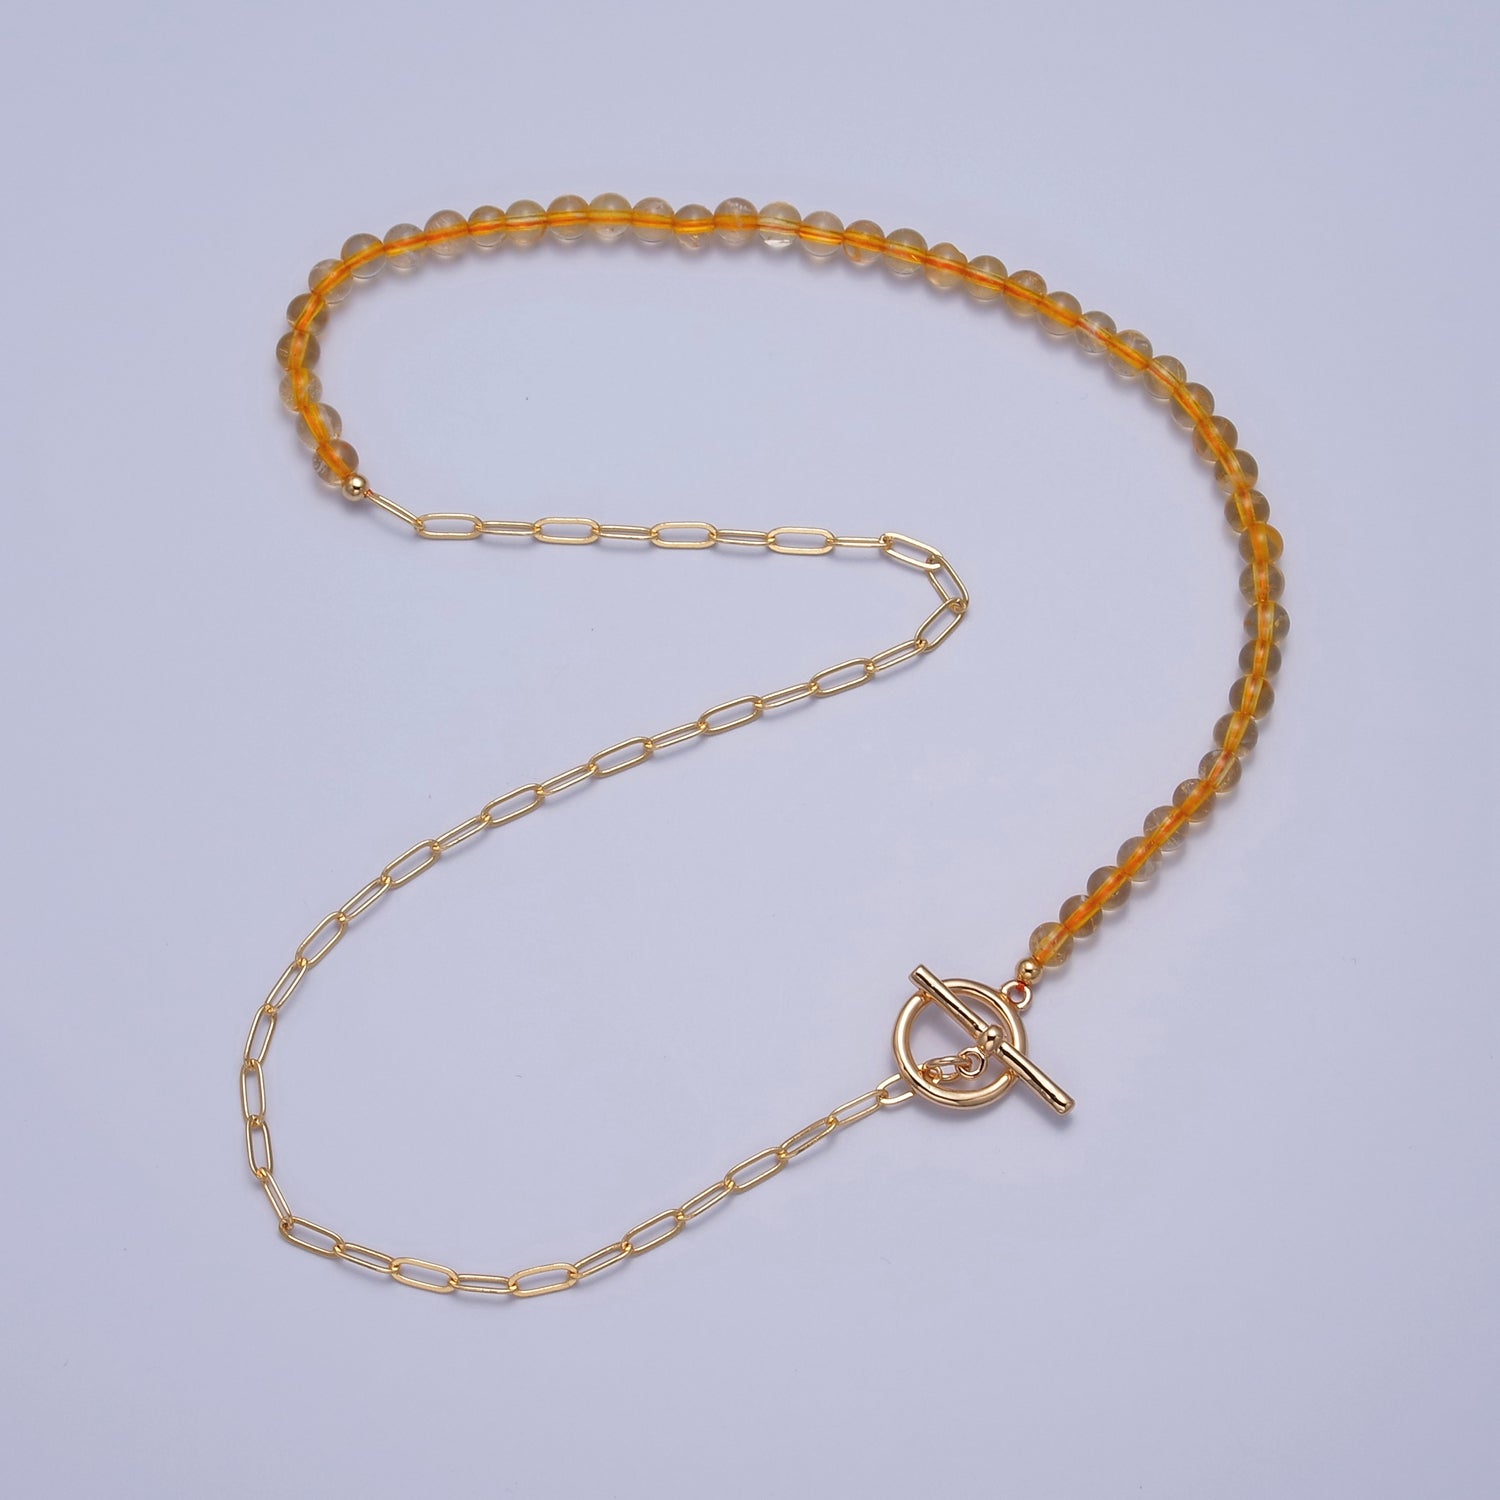 Dainty Half Bead Half Link Chain Necklace, 24k Gold Filled Paperclip Chain with Yellow Quartz Necklace WA-963 - DLUXCA